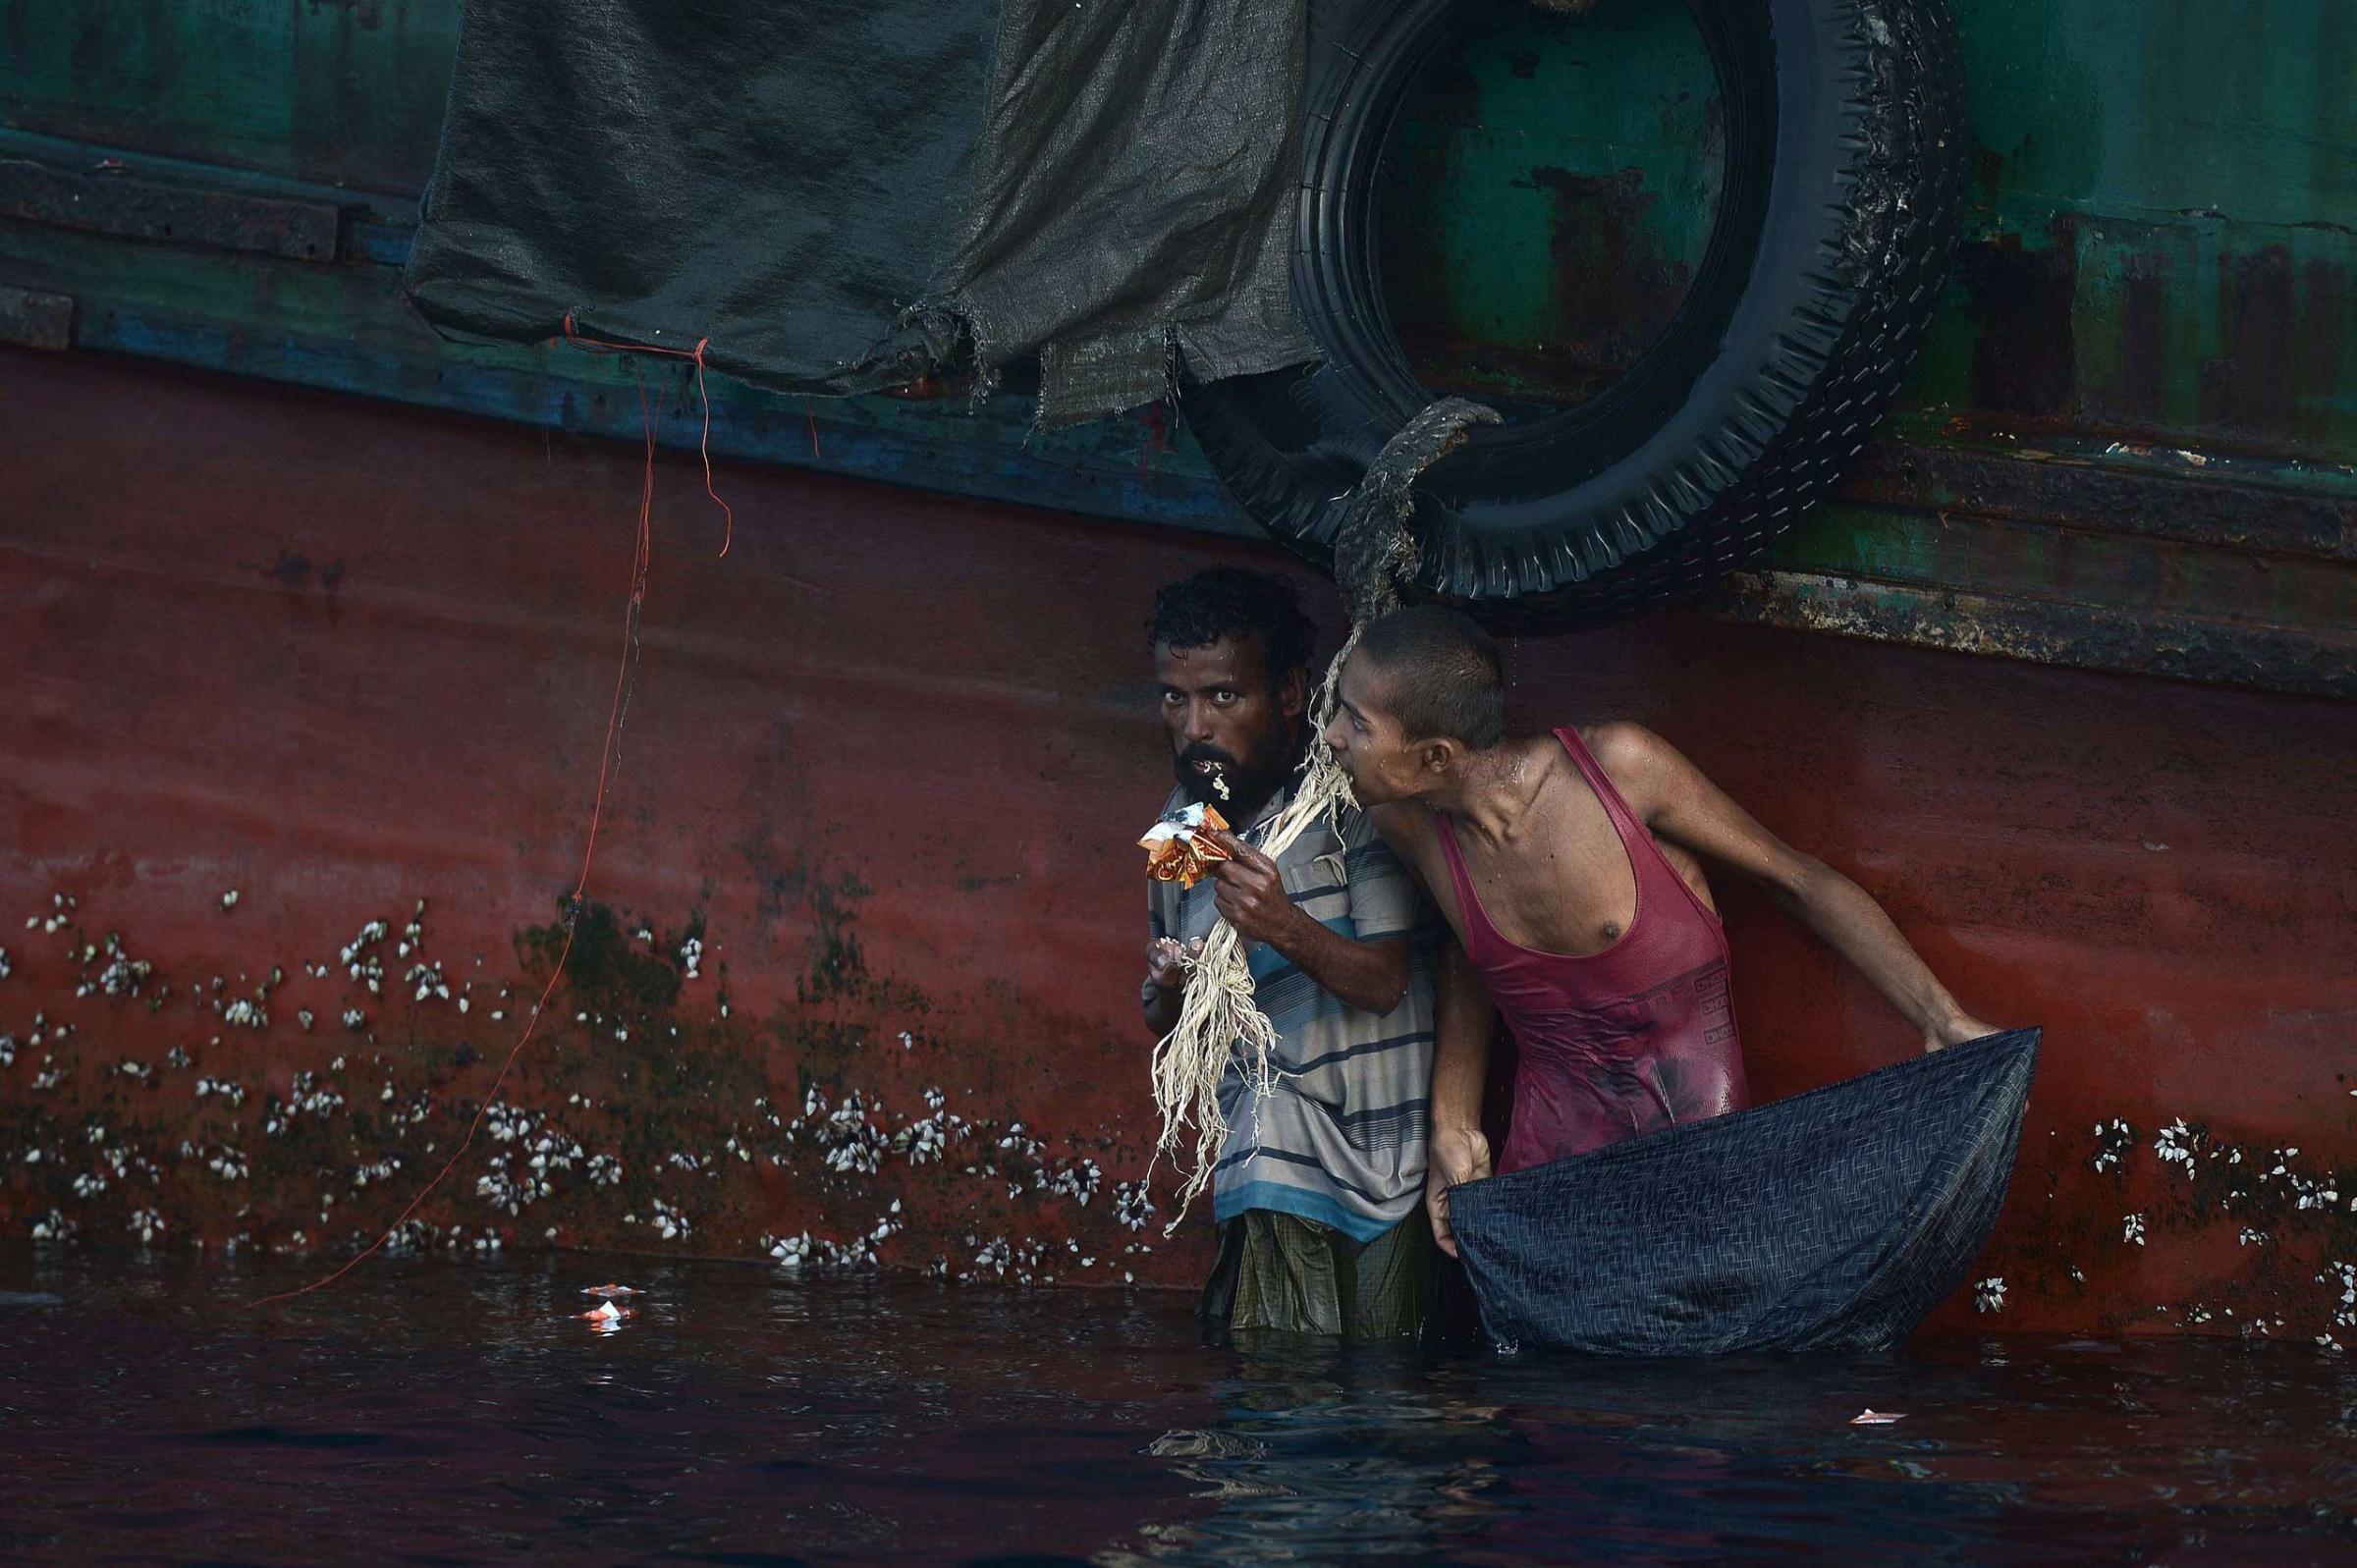 A Rohingya migrant eats food dropped by a Thai army helicopter after he jumped to collect the supplies at sea from a boat drifting in Thai waters off the southern island of Koh Lipe in the Andaman sea on May 14, 2015.